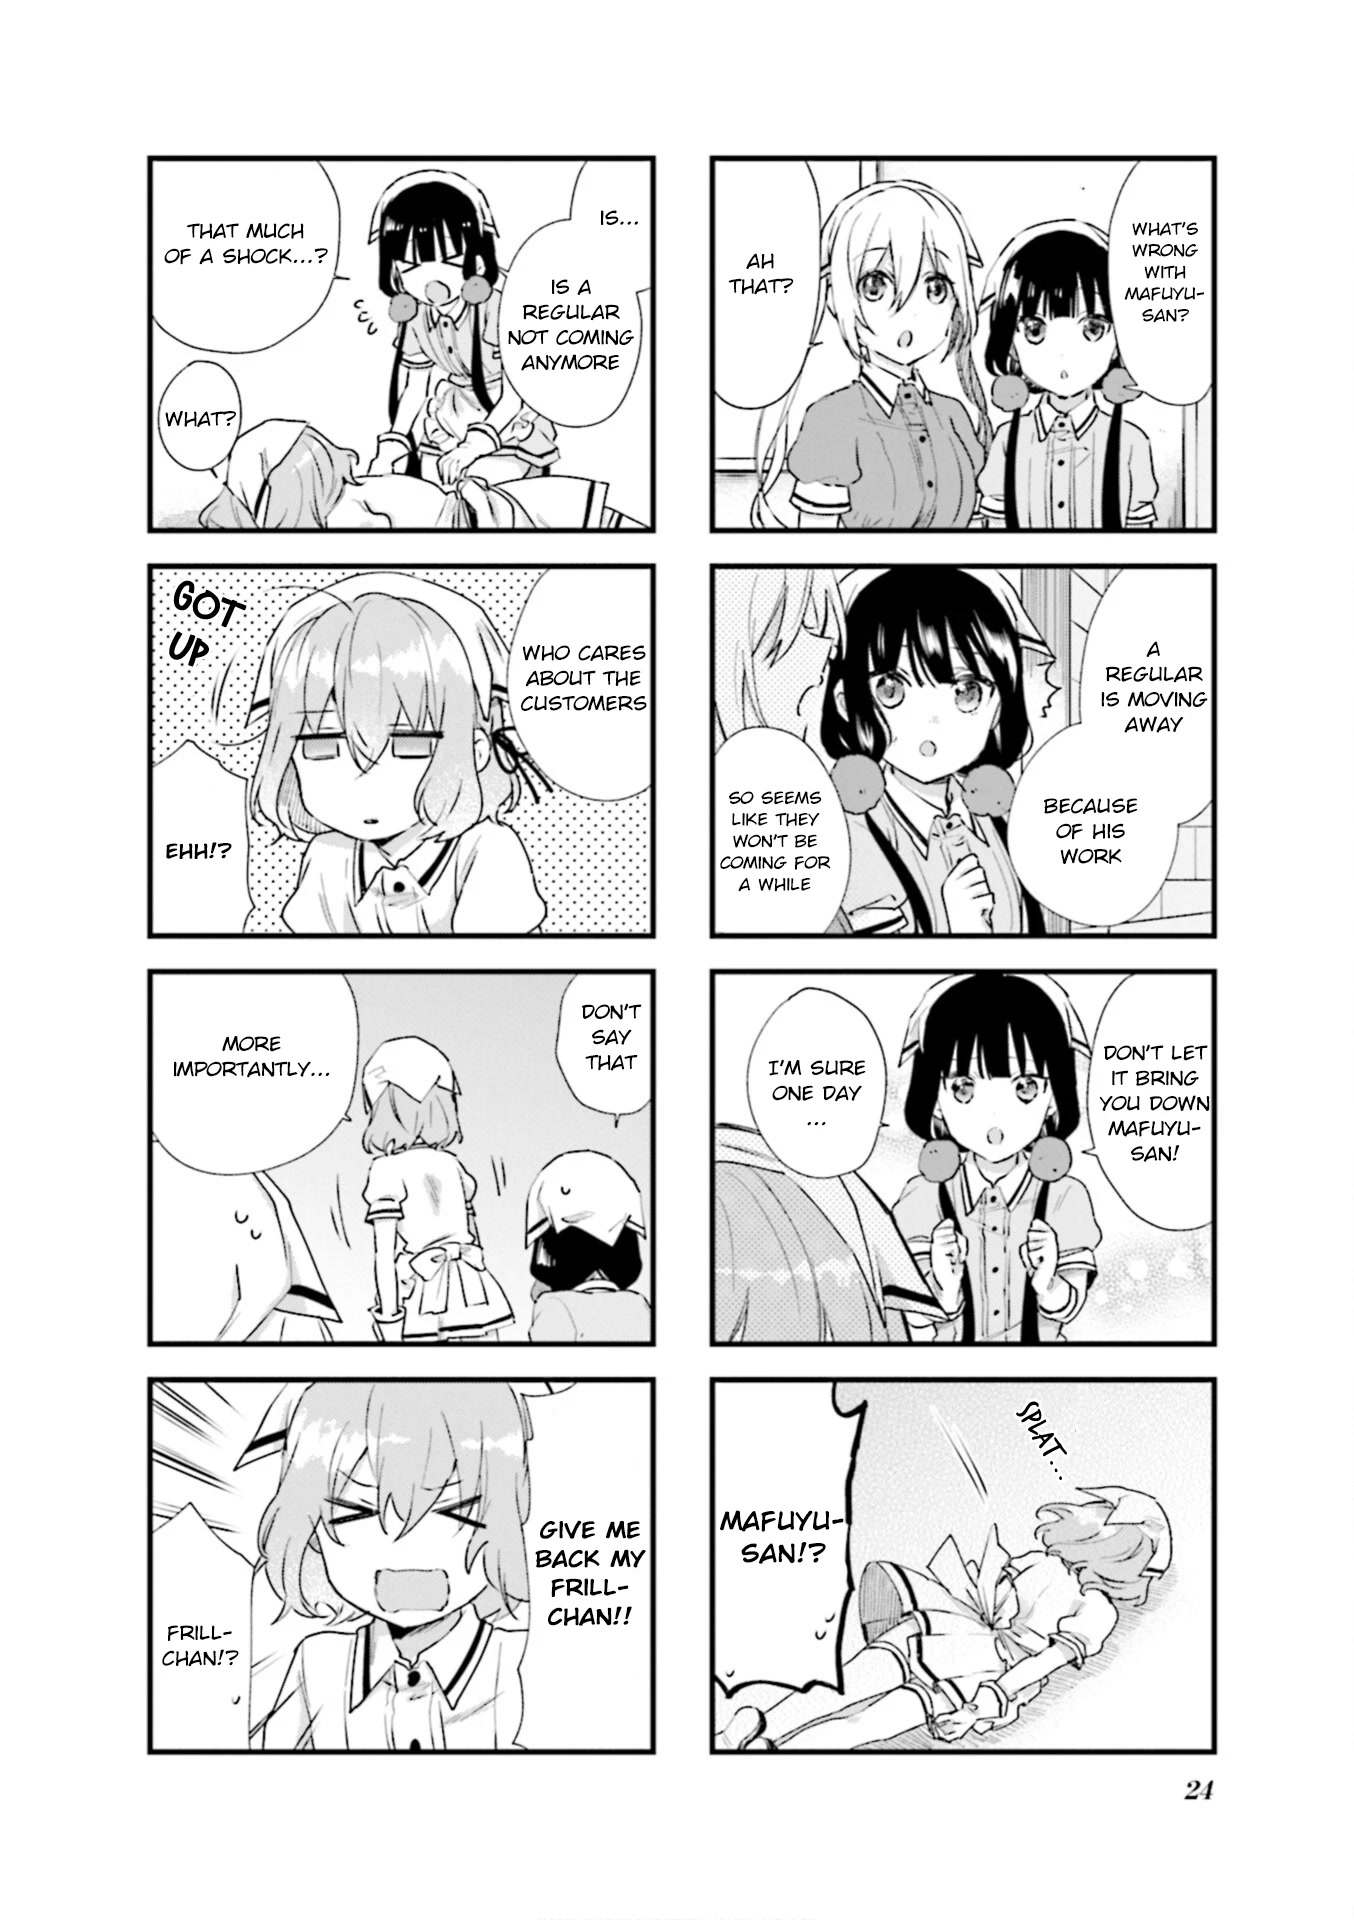 Blend S - Page 2